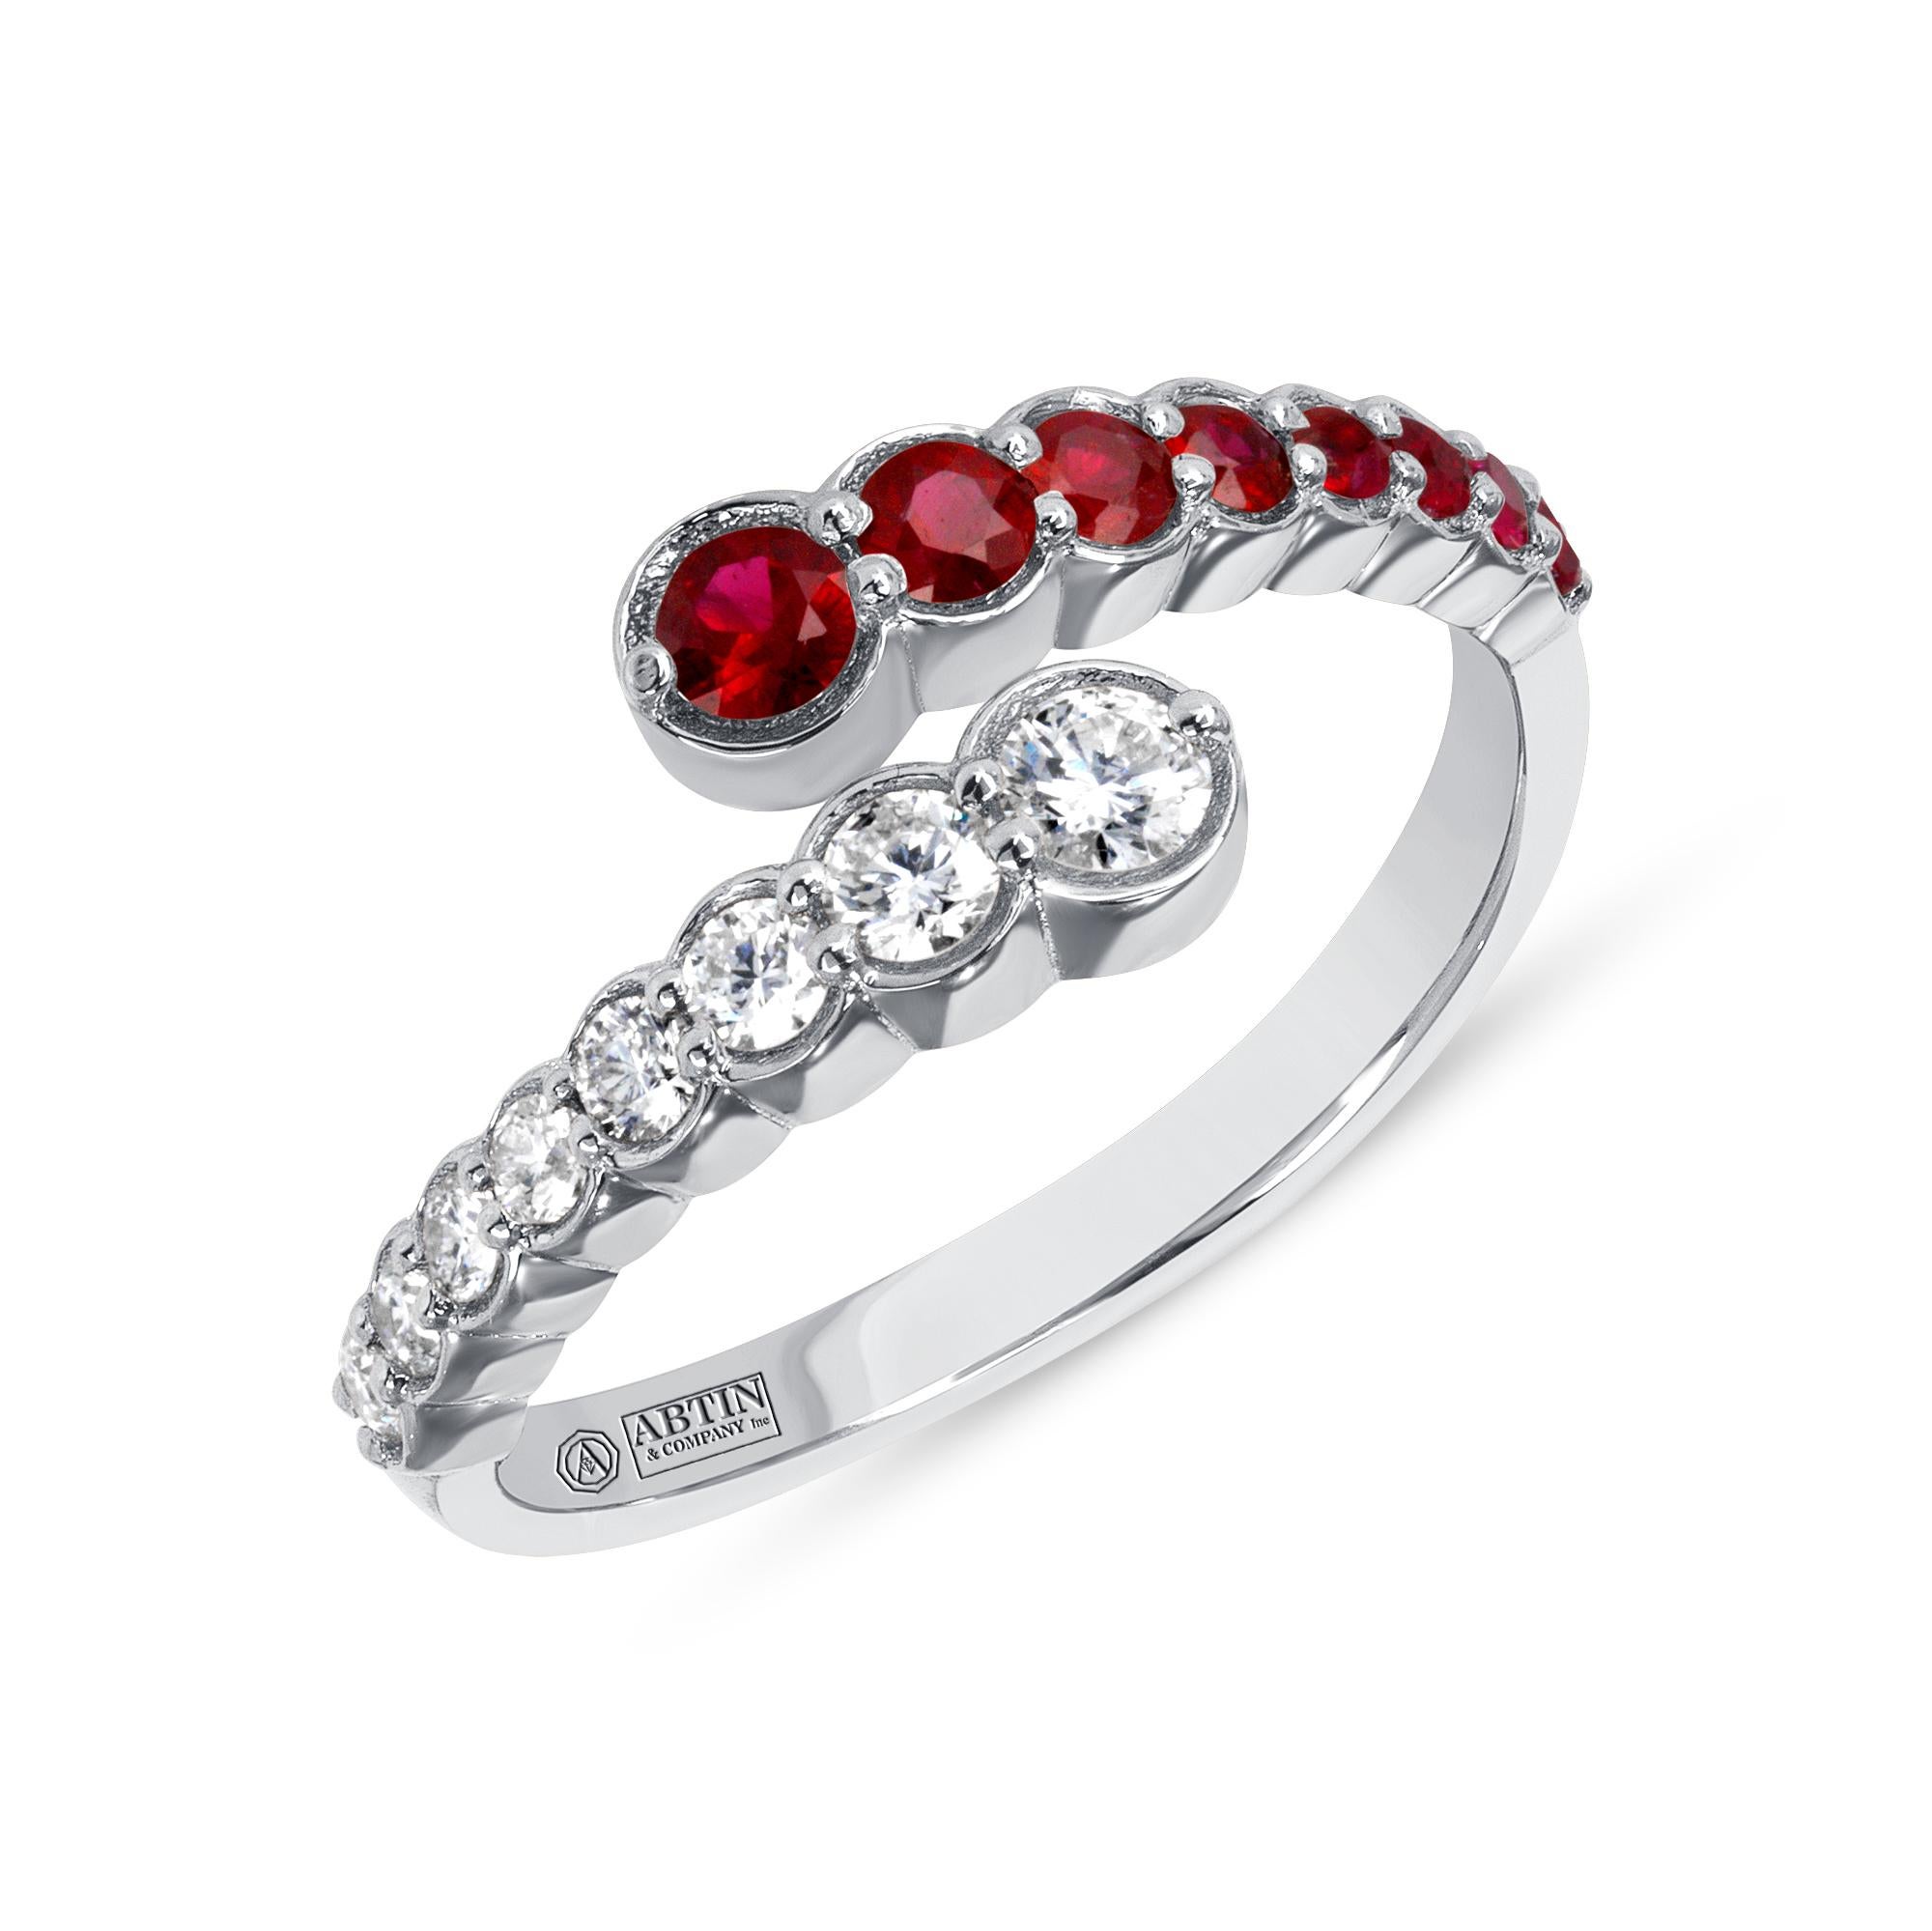 Crafted in 14K gold this ring features clean and contemporary lines. This modern and stylish open bypass ring is set with mesmerizing round-cut 
diamonds and genuine ruby. Stack it with your stacking rings or wear it solo to elevate any look.

Gold